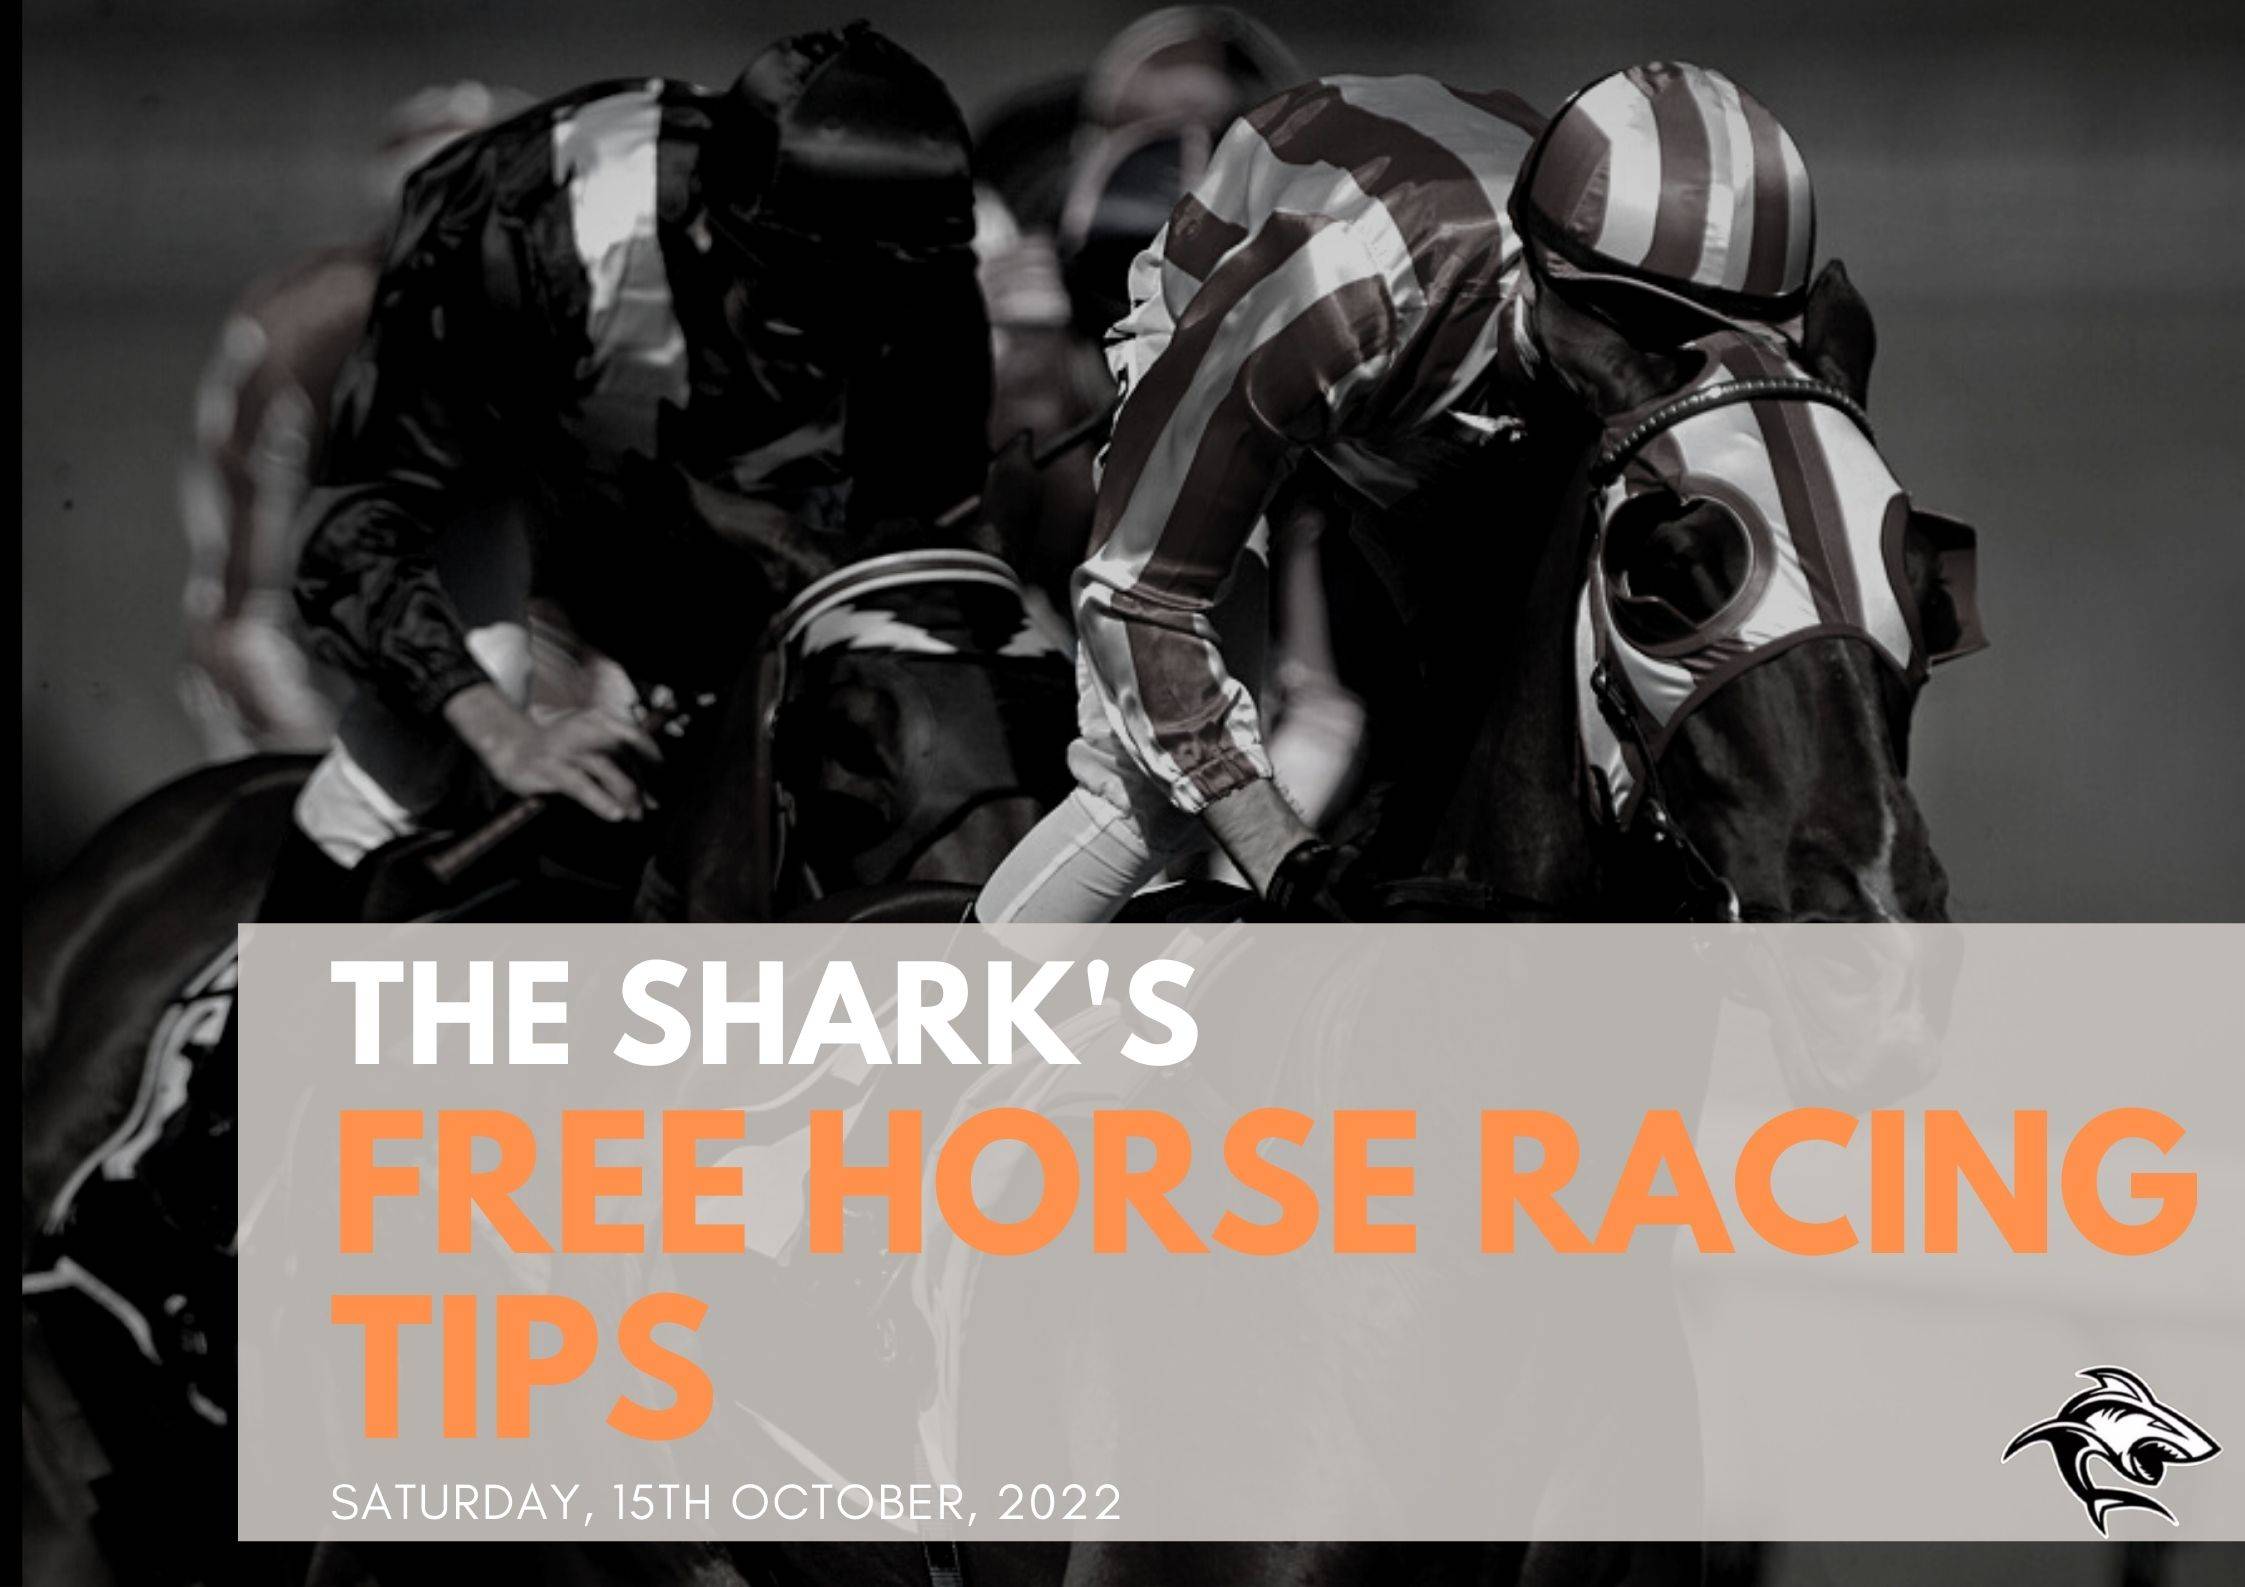 Free Horse Racing Tips - 15th Oct